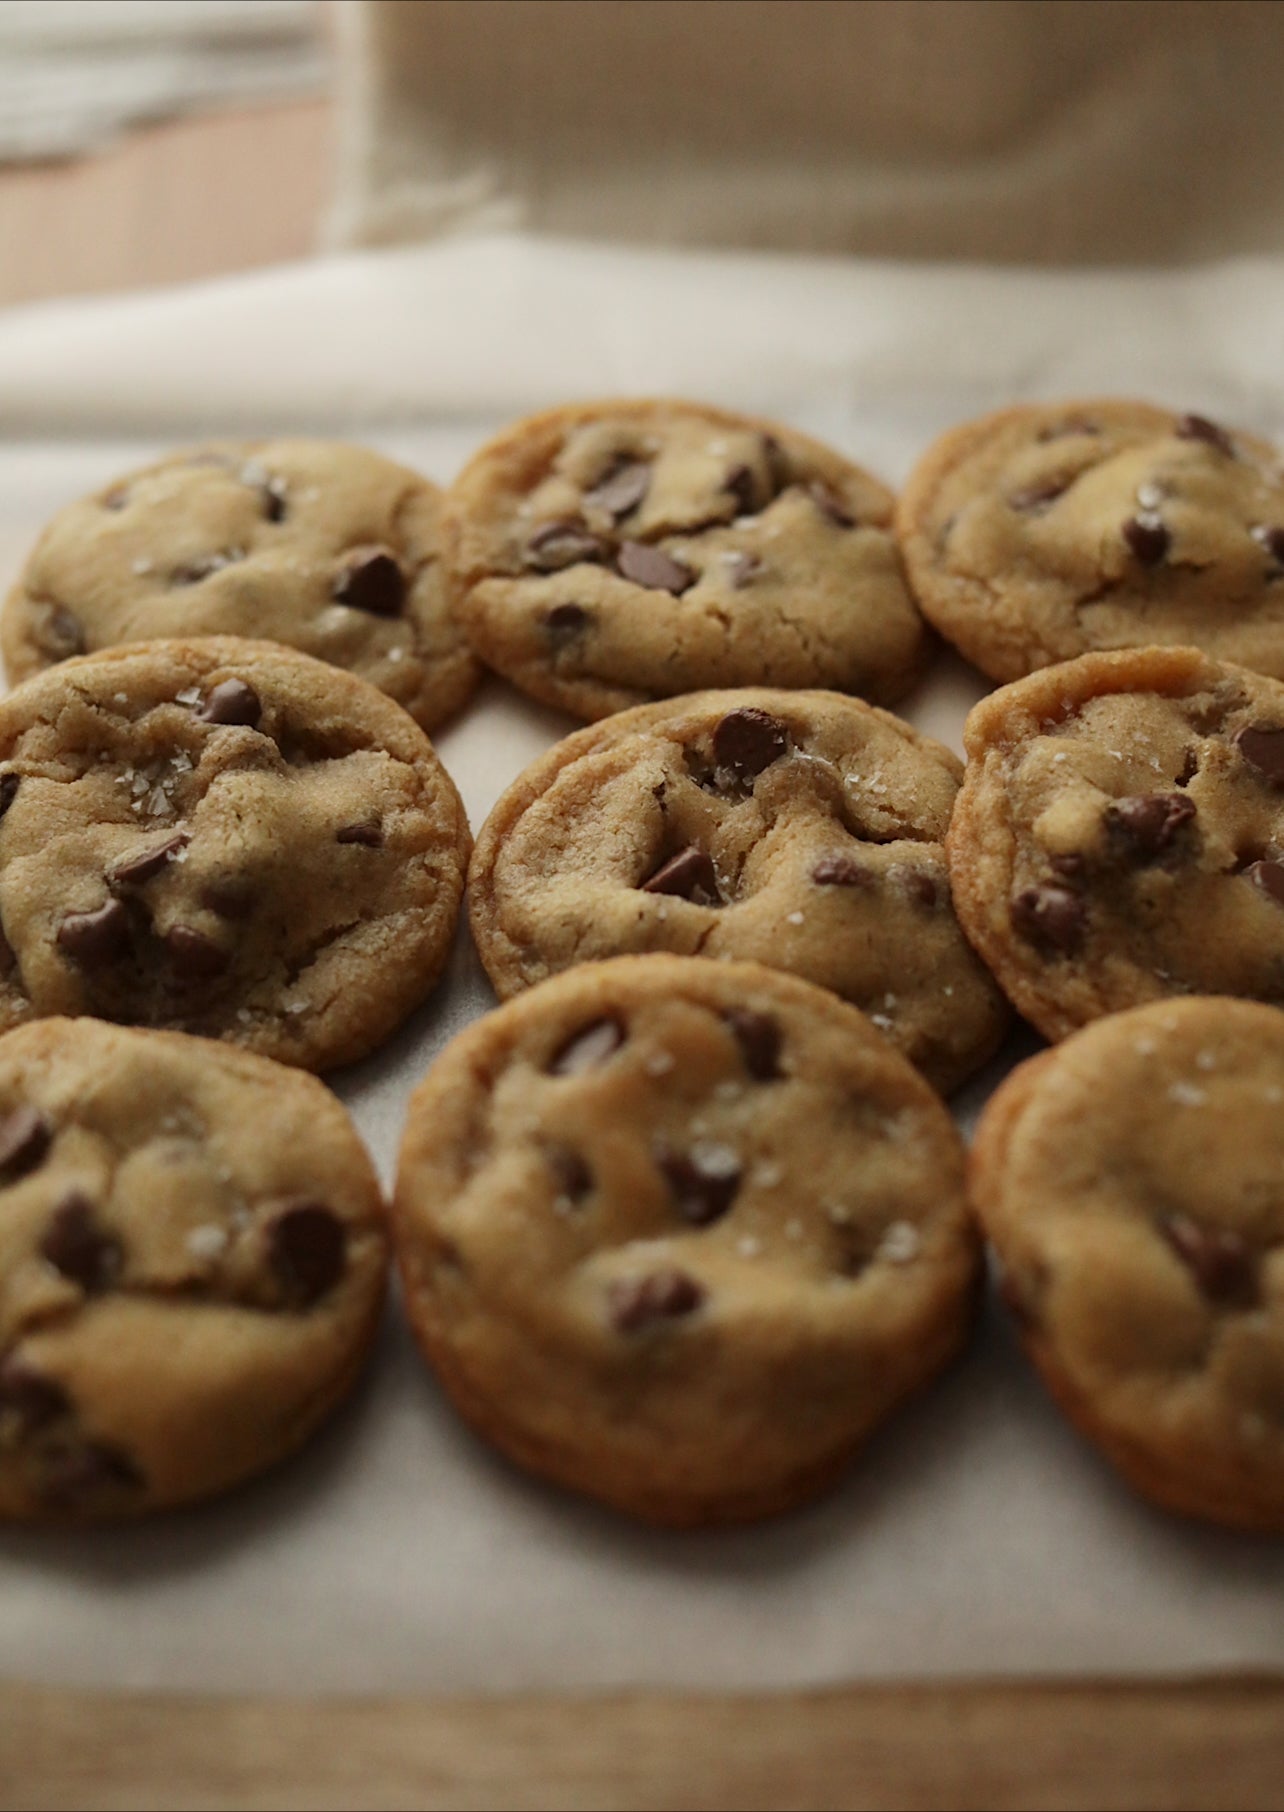 ALICIA'S CHOCOLATE CHIP COOKIES